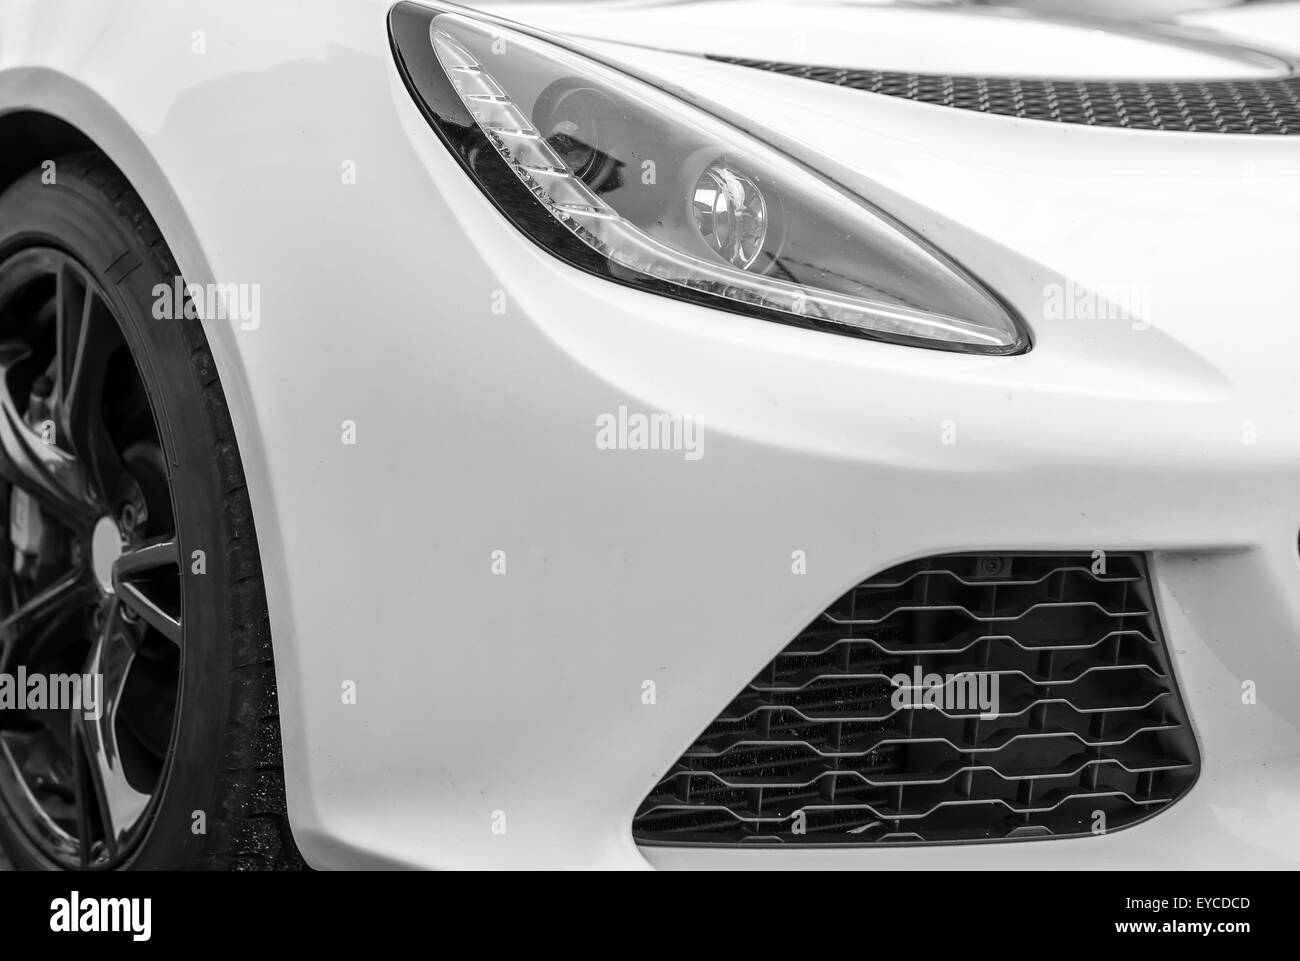 Close-up view of white sports car headlight. Stock Photo